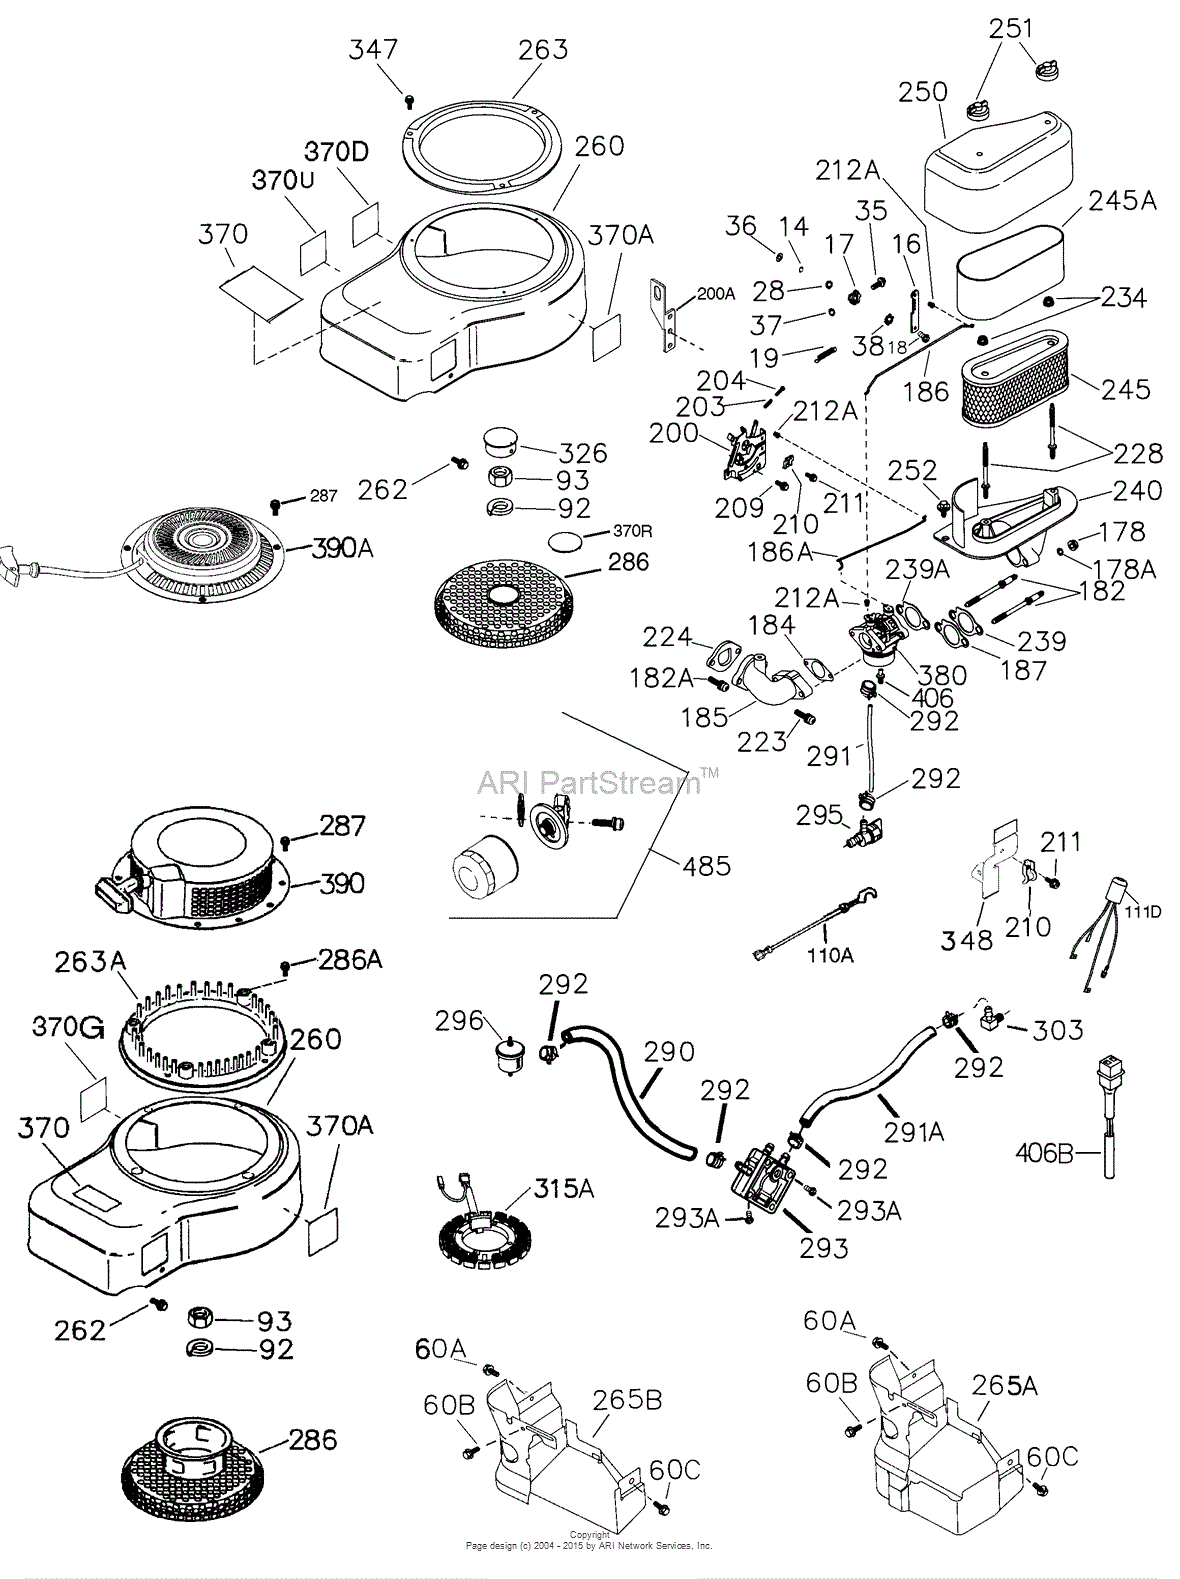 Tecumseh OHV150-204034E Parts Diagram for Engine Parts ... wiring diagram for starter motor solenoid 